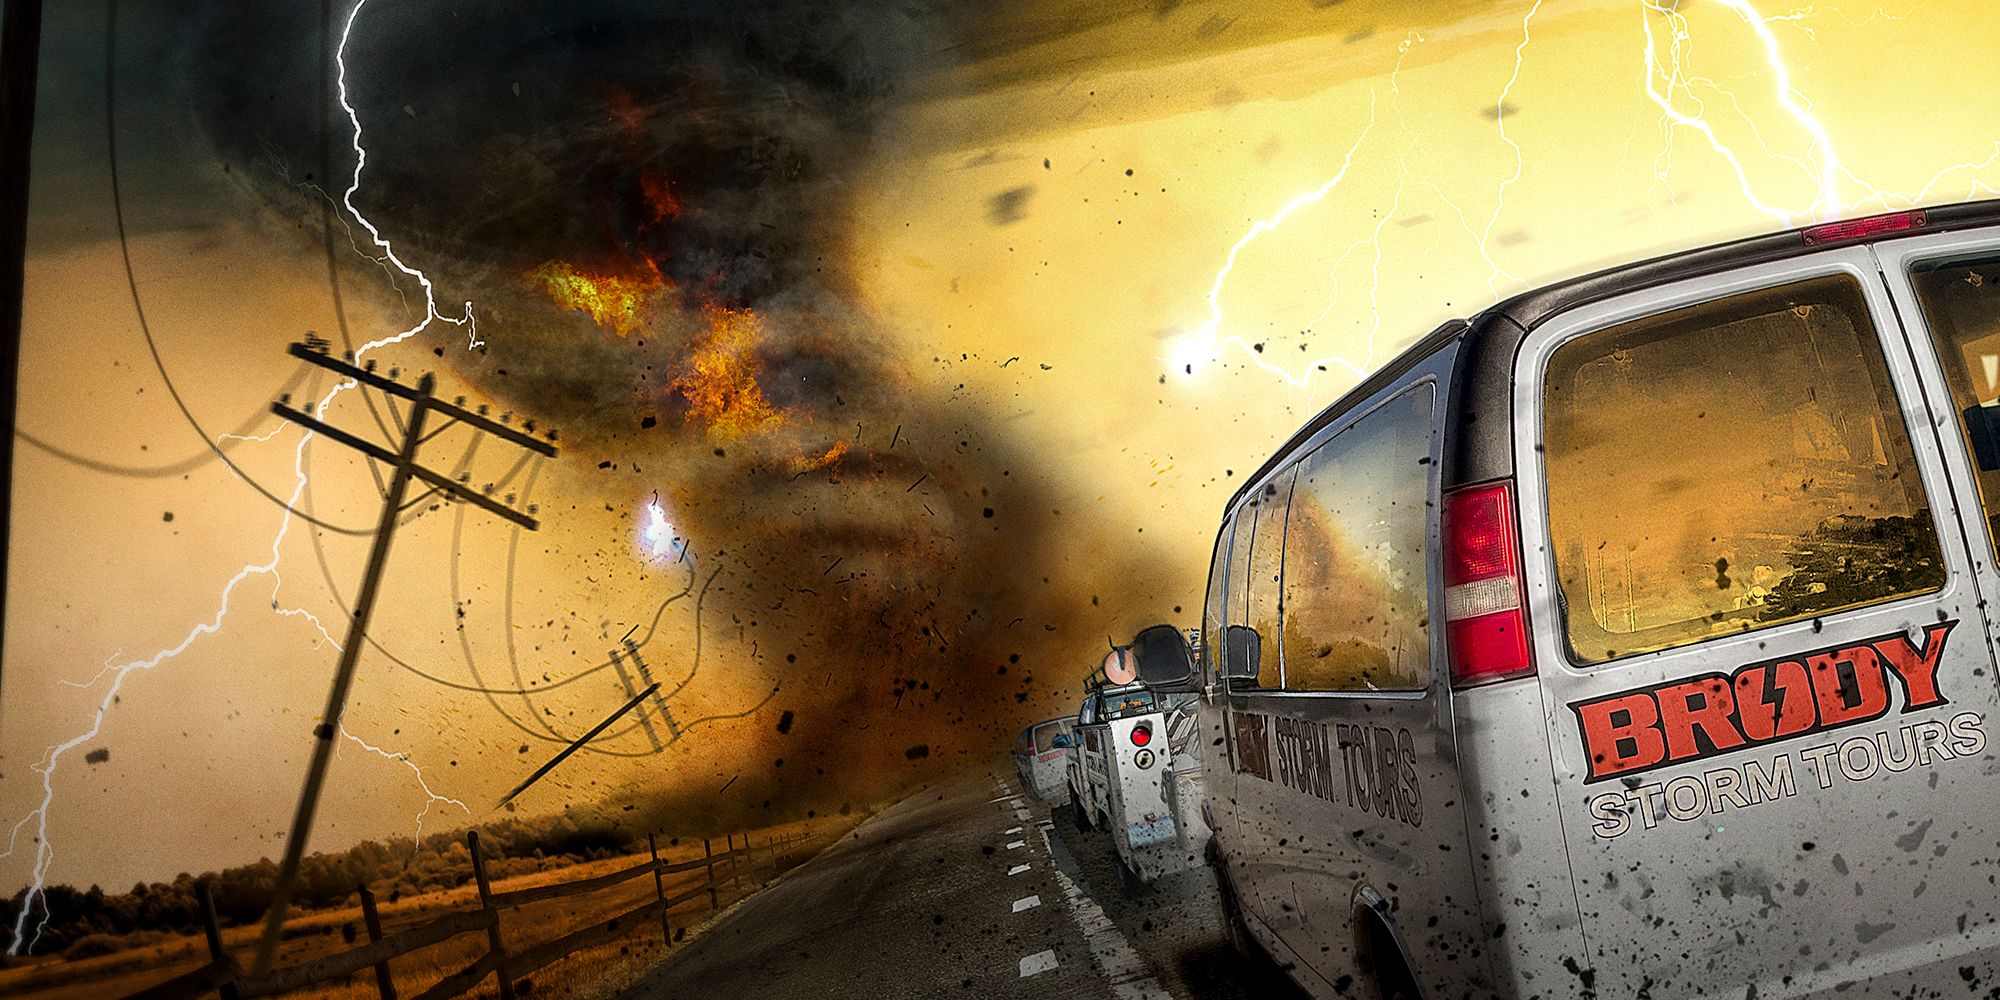 A cropped image from the Supercell poster features a van headed toward a dangerous tornado